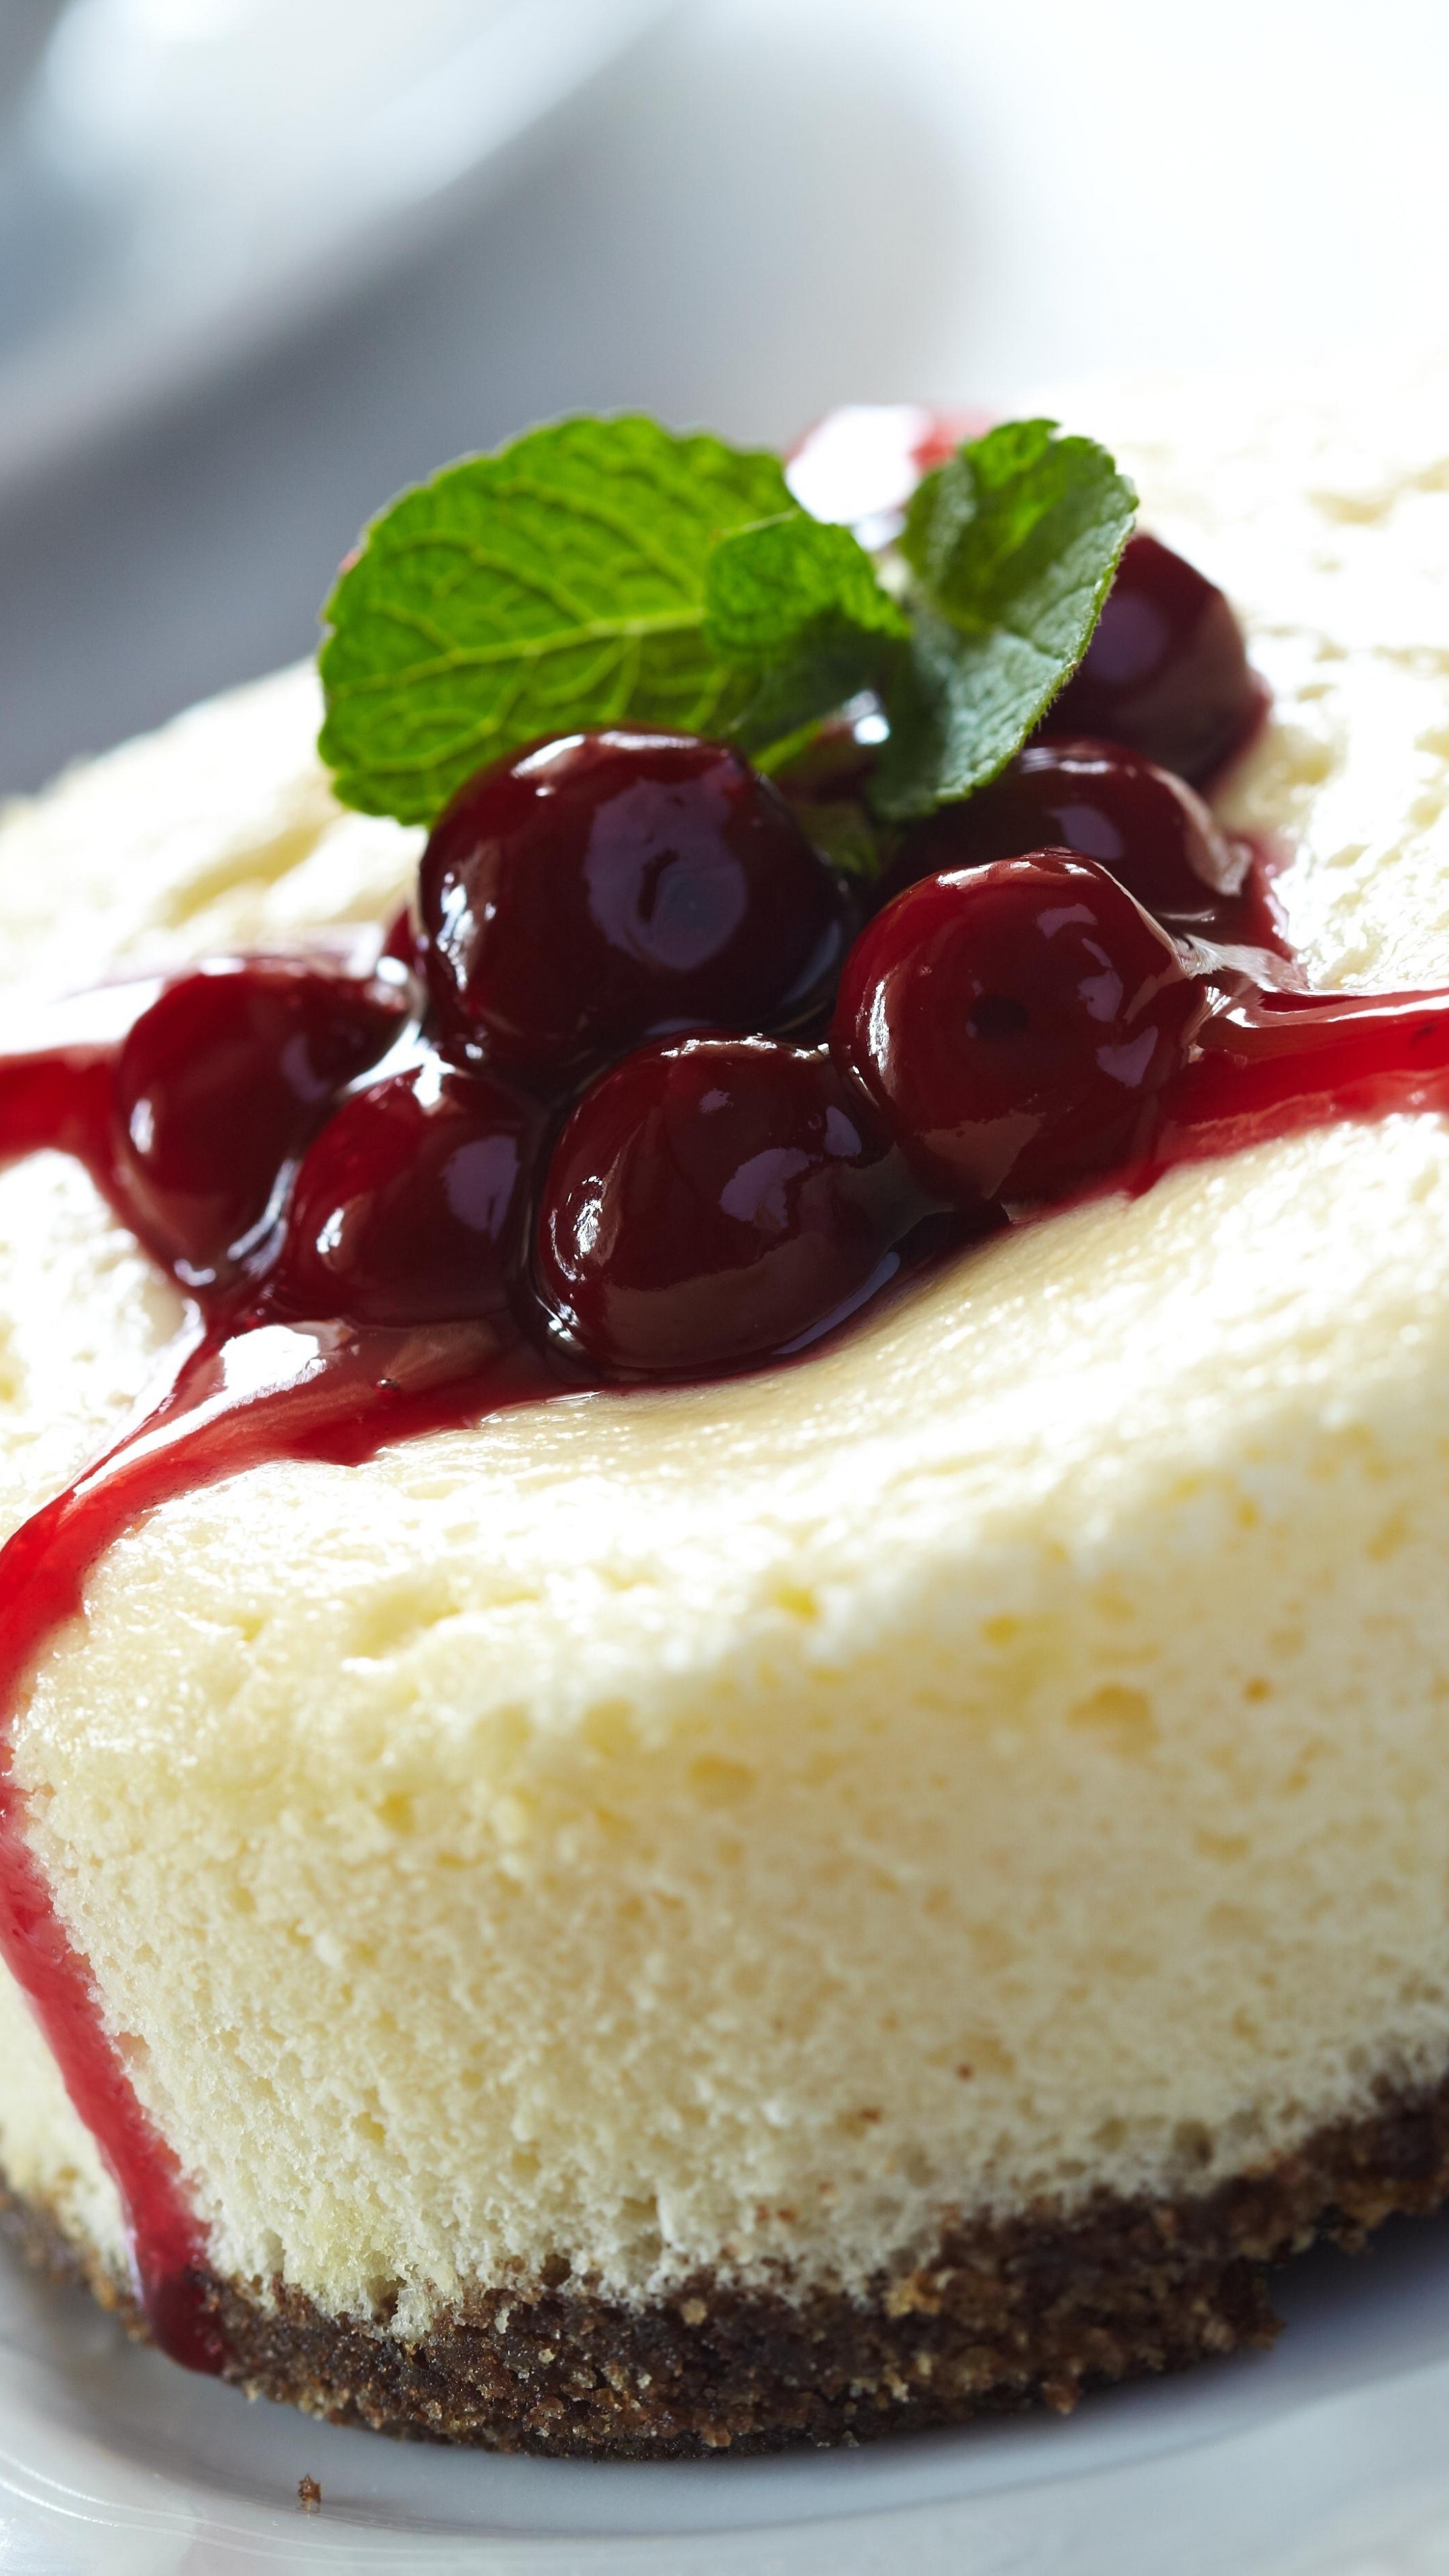 Cheesecake: Usually sweetened with sugar, Cherry, Jam, Mint. 2160x3840 4K Background.